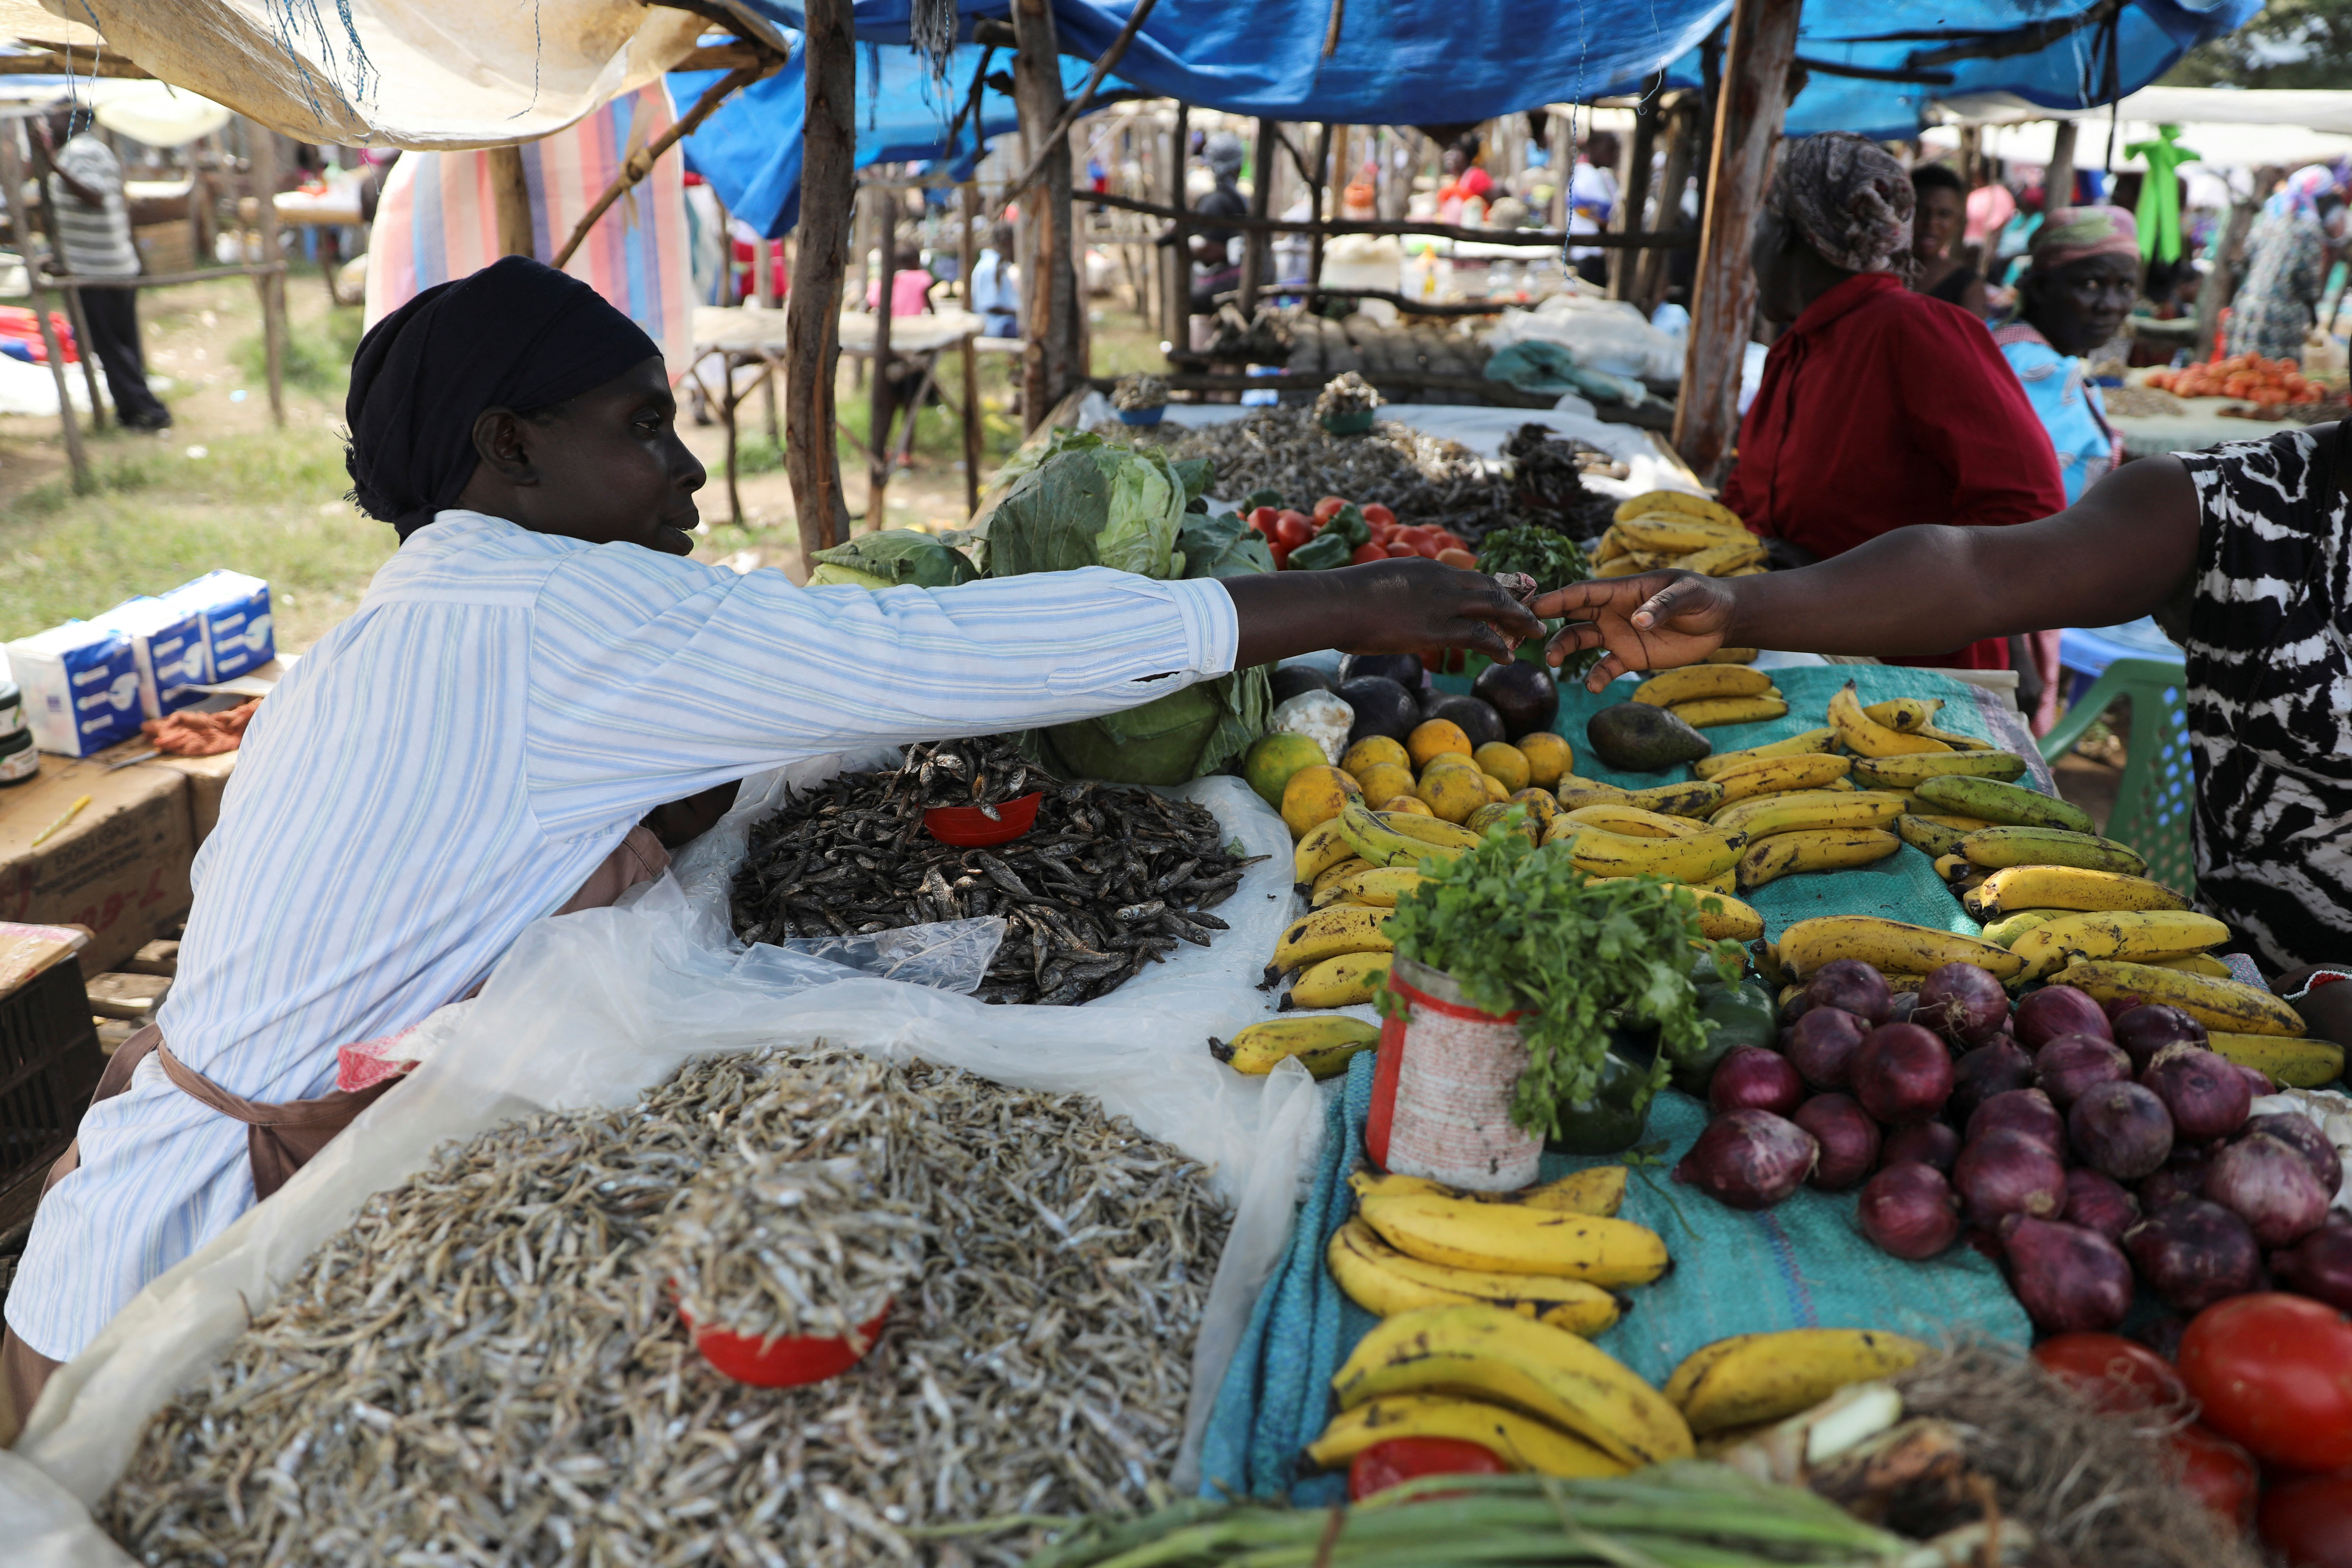 Luo shop owner Caroline Otieno sells fish and fruits at a market stall in the town of Chemase, Nandi county